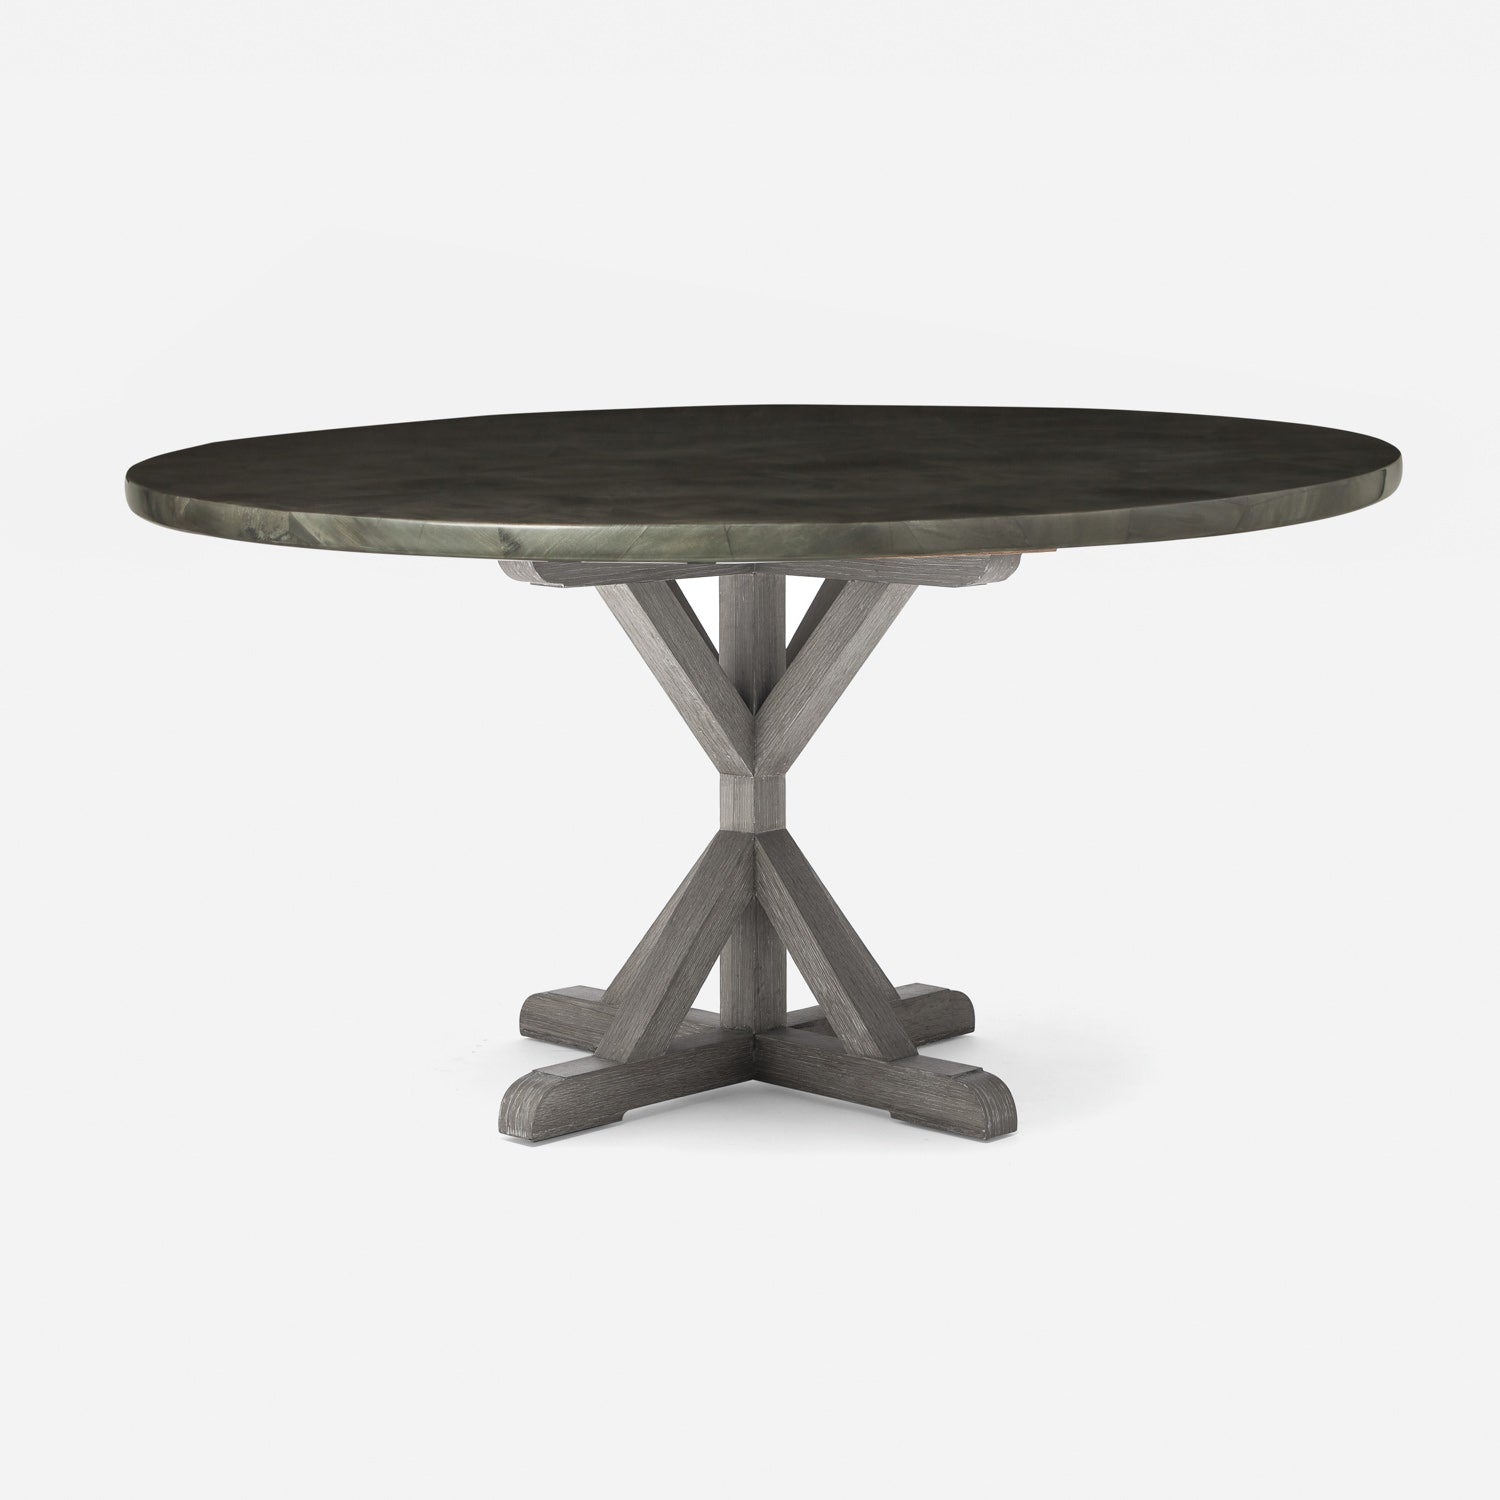 Made Goods Dane 48" x 30" Gray Cerused Oak Dinning Table With Round Dark Faux Horn Table Top